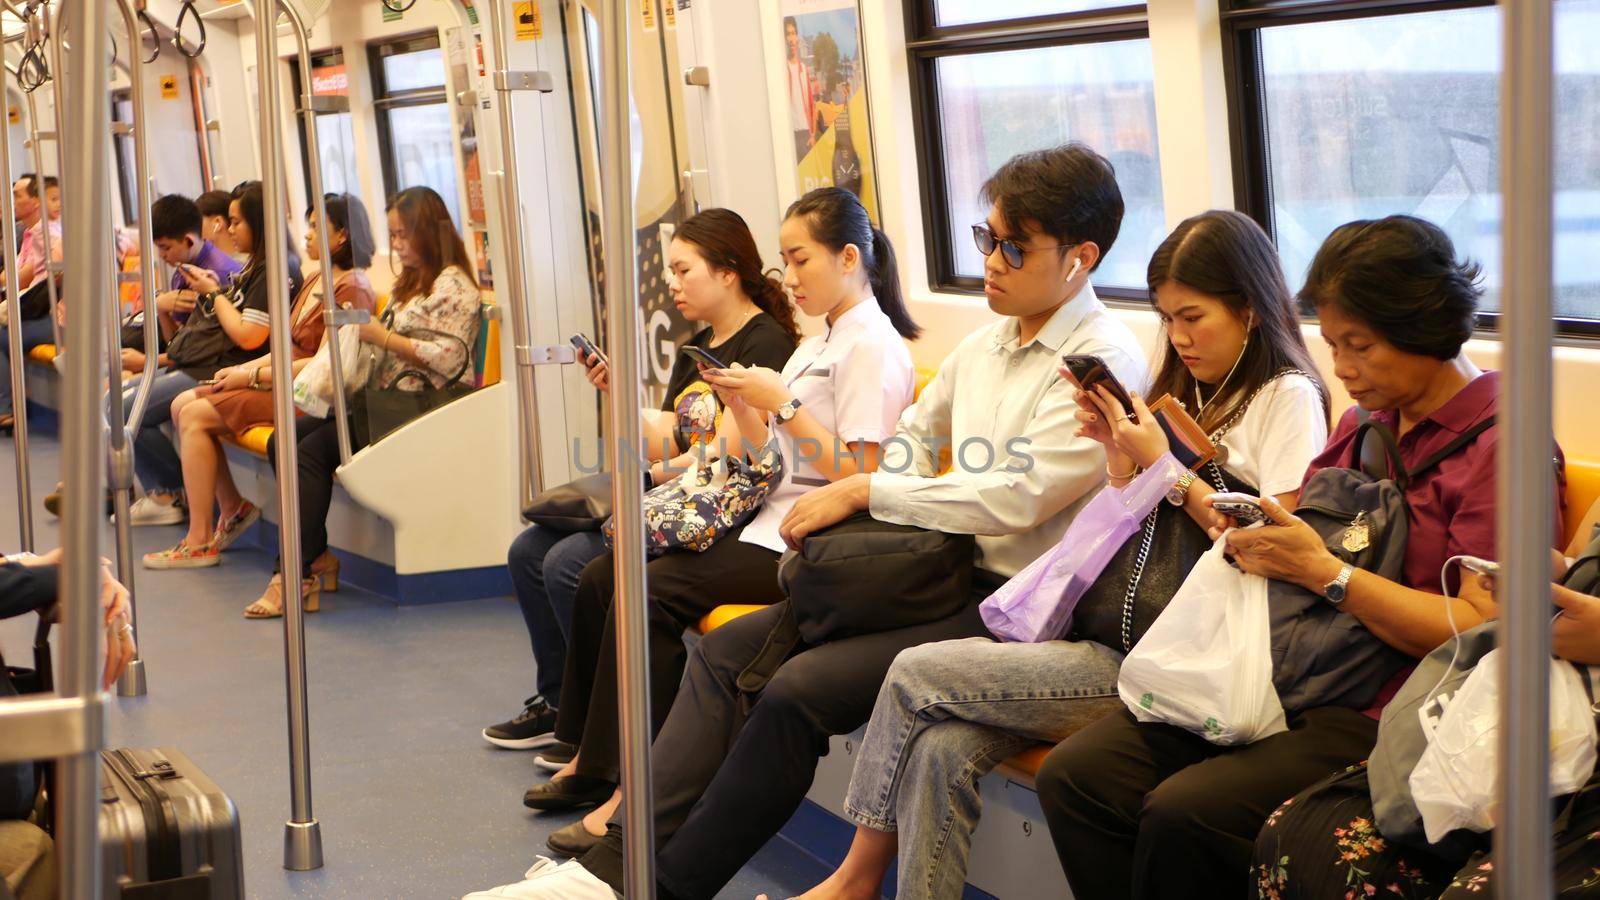 BANGKOK, THAILAND - 13 JULY, 2019: Asian passengers in train using smartphones. Thai people online surfing internet in bts car. Public transportation. Addiction from social media and phone in subway. by DogoraSun